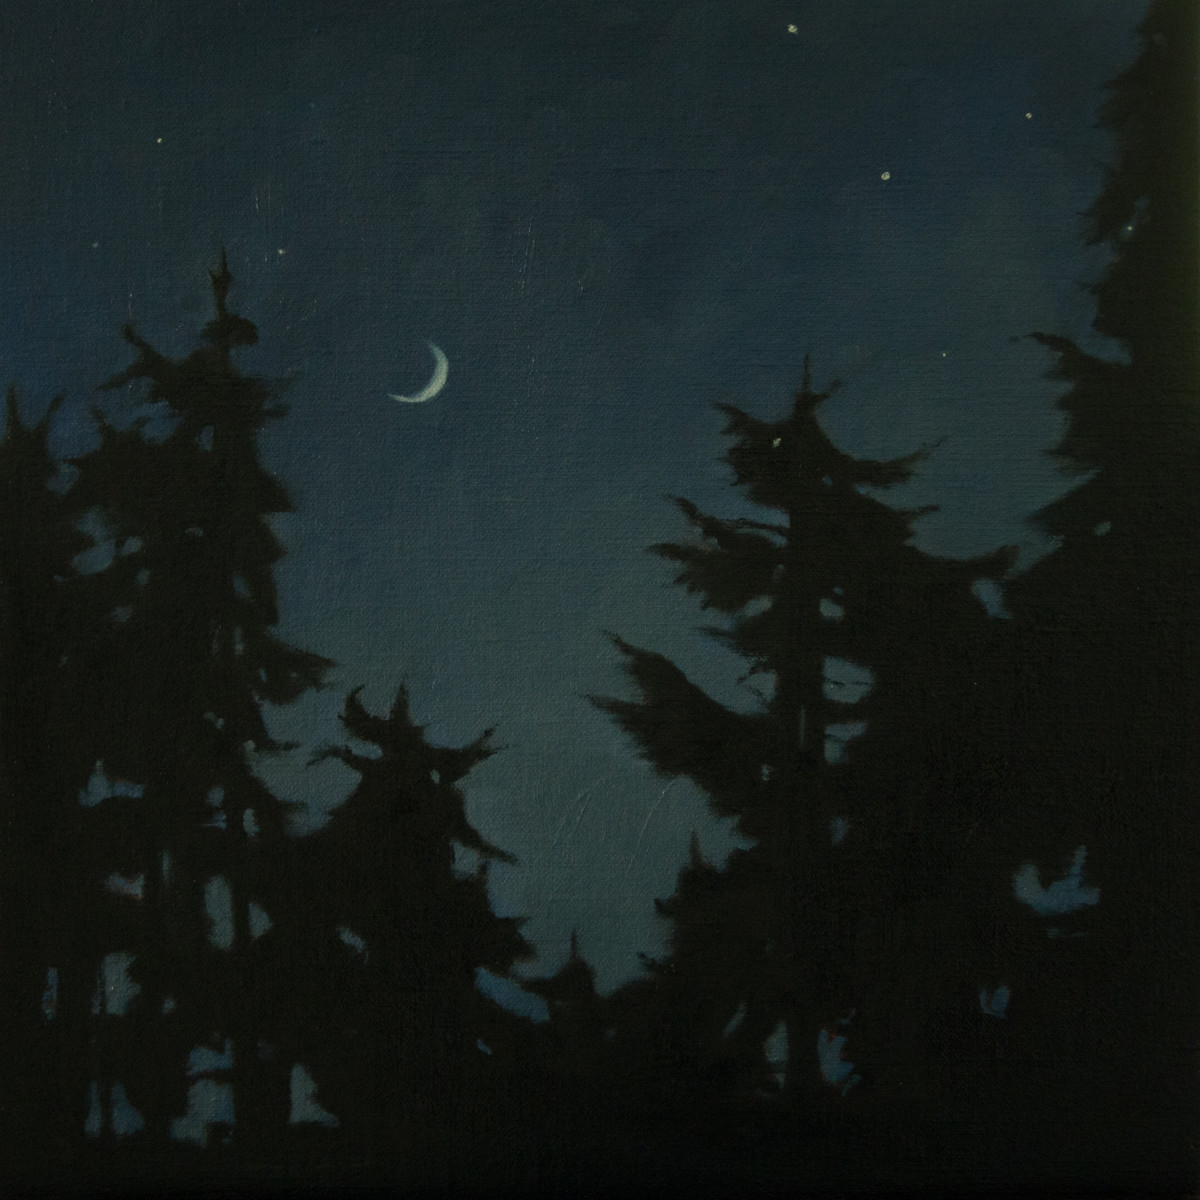 New Moon and Stars over the Forest by Lisa McShane 